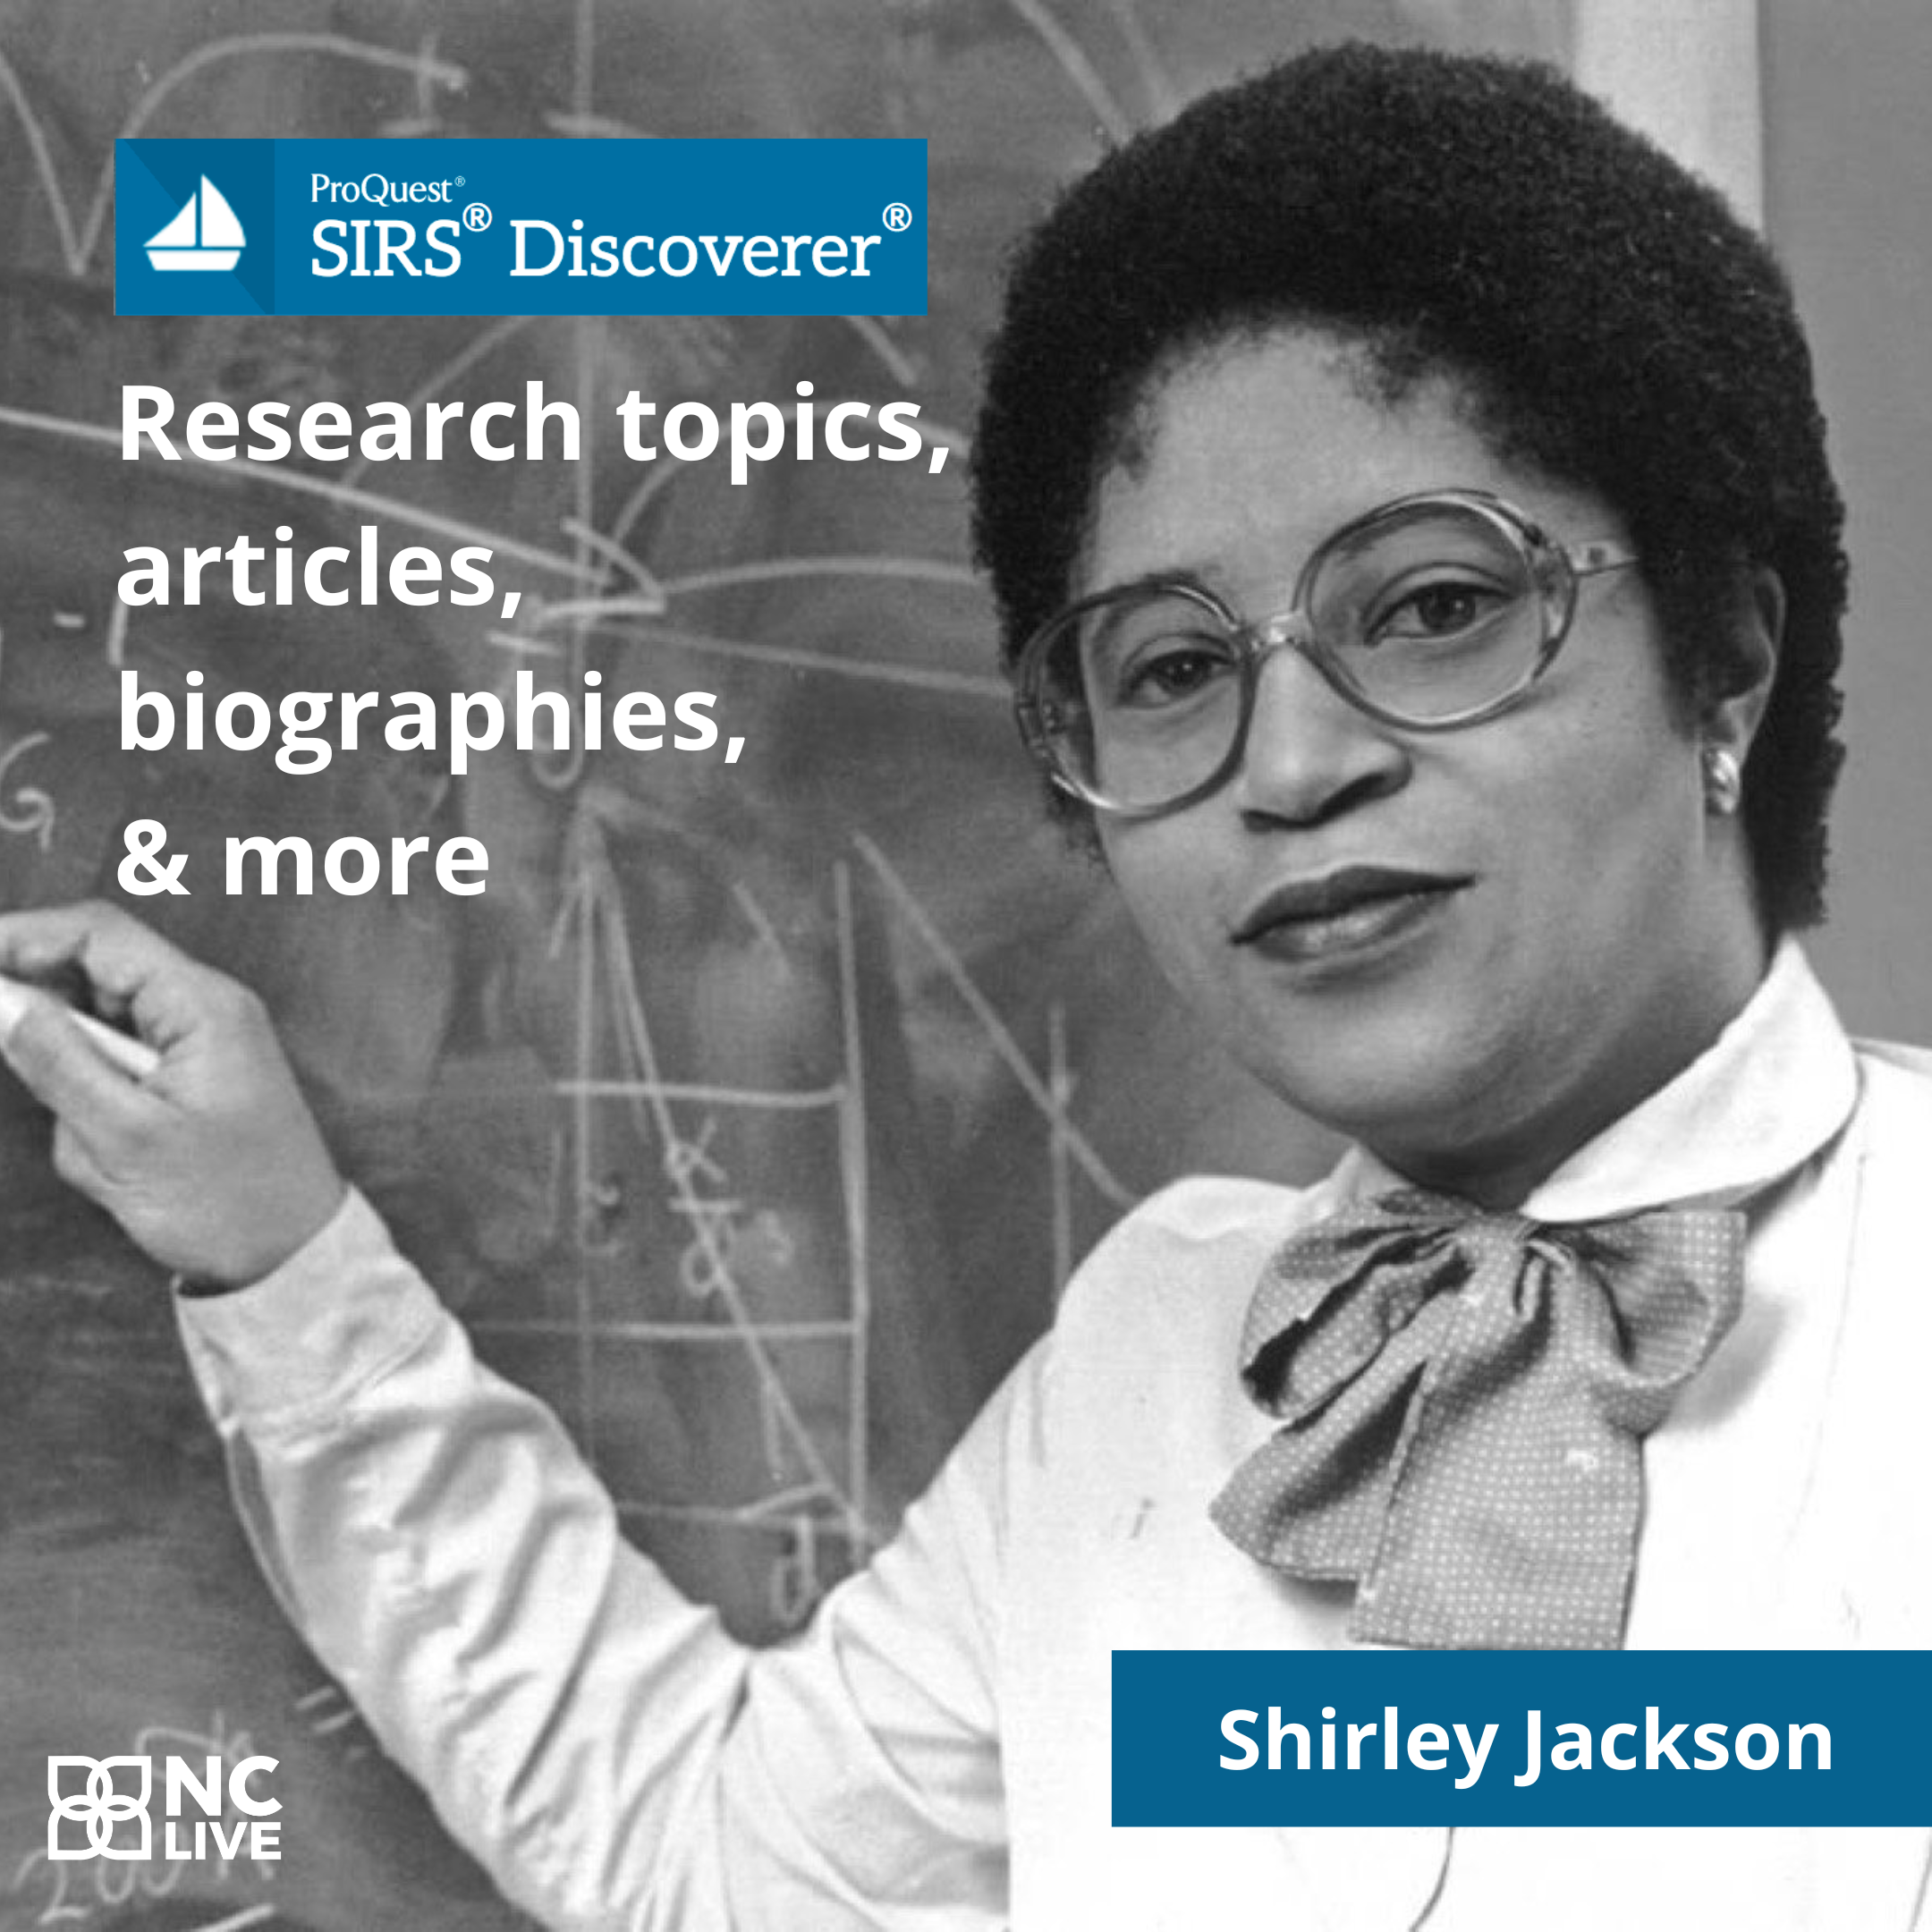 Shirley Jackson writing on a blackboard alongside information about SIRS Discoverer.